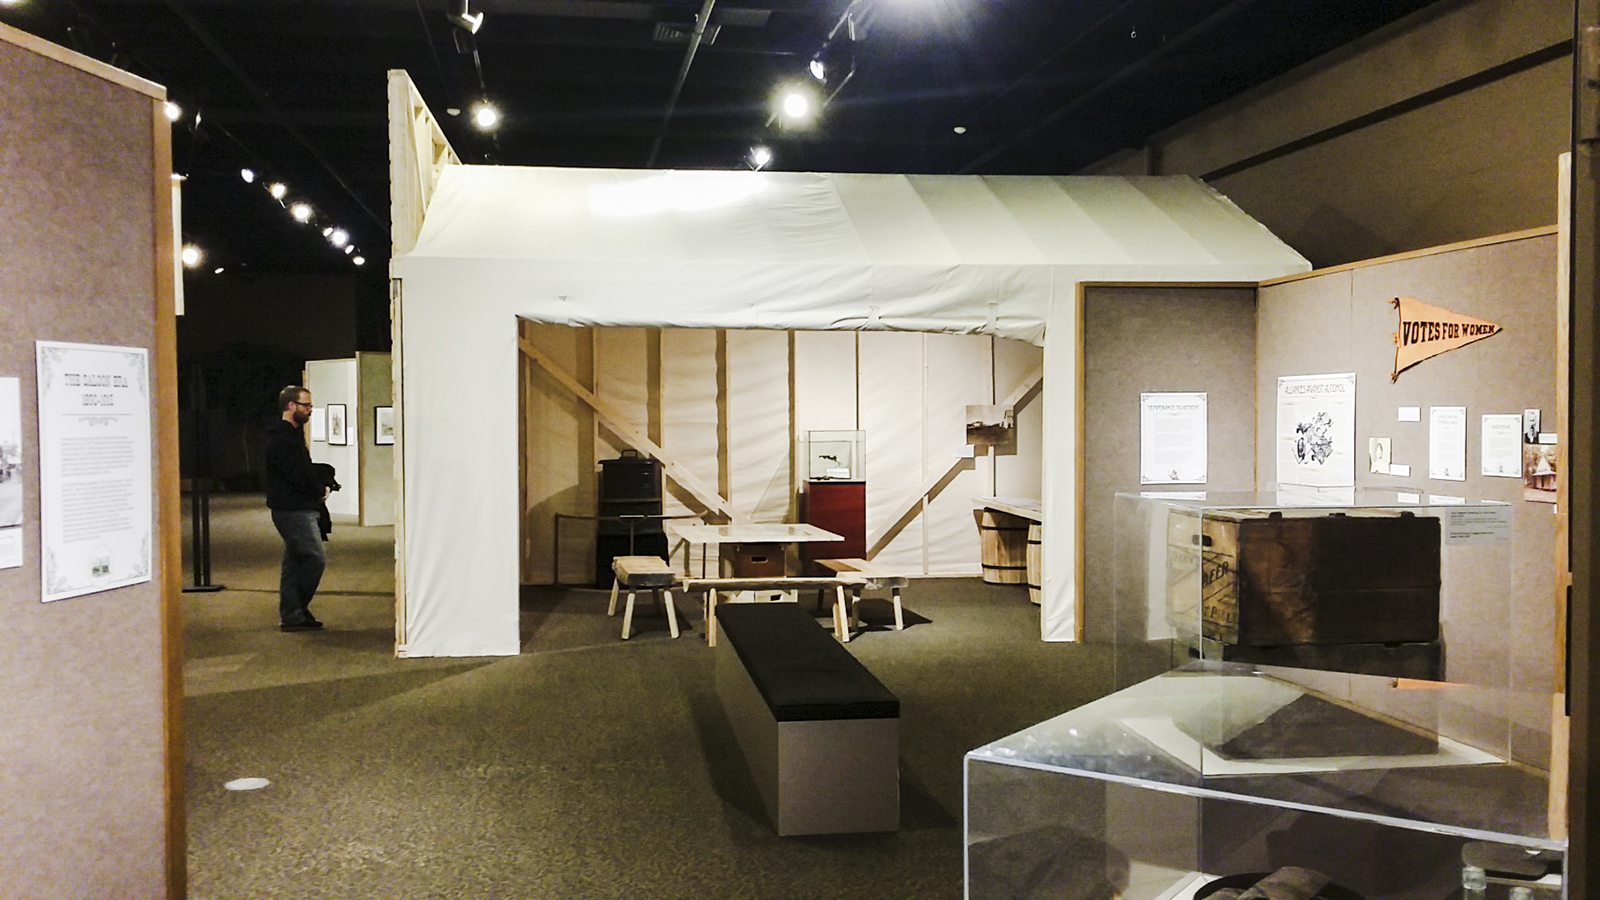 Replica of an alcohol tents during the Prohibition in the USA.